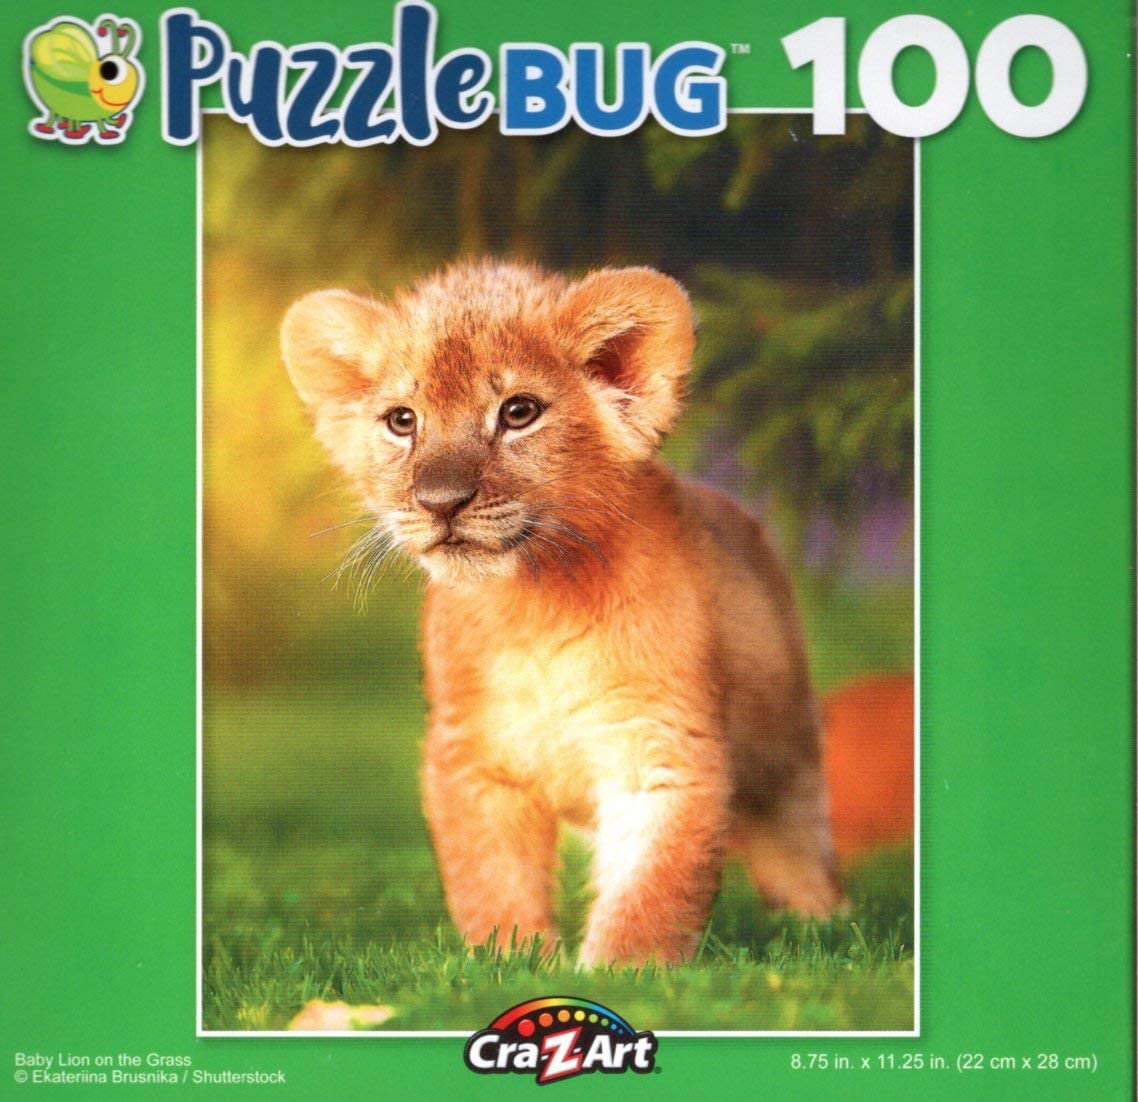 Baby Lion on The Grass - Puzzlebug - 100 Piece Jigsaw Puzzle